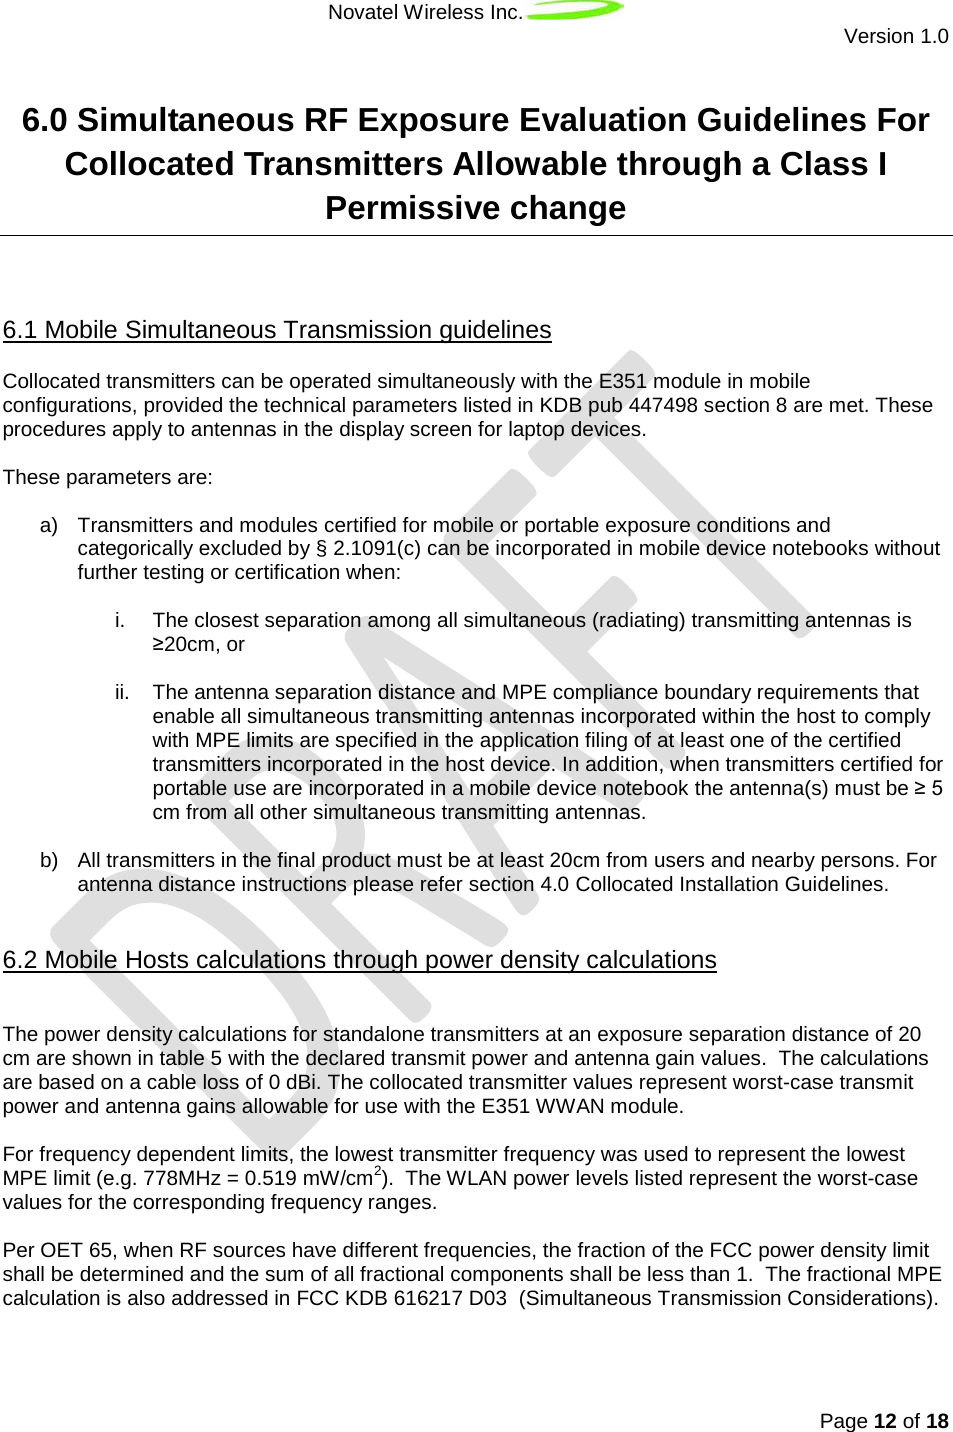 Novatel Wireless Inc.  Version 1.0   Page 12 of 18  6.0 Simultaneous RF Exposure Evaluation Guidelines For Collocated Transmitters Allowable through a Class I Permissive change  Collocated transmitters can be operated simultaneously with the E351 module in mobile configurations, provided the technical parameters listed in KDB pub 447498 section 8 are met. These procedures apply to antennas in the display screen for laptop devices. 6.1 Mobile Simultaneous Transmission guidelines  These parameters are:  a) Transmitters and modules certified for mobile or portable exposure conditions and categorically excluded by § 2.1091(c) can be incorporated in mobile device notebooks without further testing or certification when:   i. The closest separation among all simultaneous (radiating) transmitting antennas is ≥20cm, or  ii. The antenna separation distance and MPE compliance boundary requirements that enable all simultaneous transmitting antennas incorporated within the host to comply with MPE limits are specified in the application filing of at least one of the certified transmitters incorporated in the host device. In addition, when transmitters certified for portable use are incorporated in a mobile device notebook the antenna(s) must be ≥ 5 cm from all other simultaneous transmitting antennas.  b) All transmitters in the final product must be at least 20cm from users and nearby persons. For antenna distance instructions please refer section 4.0 Collocated Installation Guidelines.   6.2 Mobile Hosts calculations through power density calculations The power density calculations for standalone transmitters at an exposure separation distance of 20 cm are shown in table 5 with the declared transmit power and antenna gain values.  The calculations are based on a cable loss of 0 dBi. The collocated transmitter values represent worst-case transmit power and antenna gains allowable for use with the E351 WWAN module.  For frequency dependent limits, the lowest transmitter frequency was used to represent the lowest MPE limit (e.g. 778MHz = 0.519 mW/cm2).  The WLAN power levels listed represent the worst-case values for the corresponding frequency ranges.  Per OET 65, when RF sources have different frequencies, the fraction of the FCC power density limit shall be determined and the sum of all fractional components shall be less than 1.  The fractional MPE calculation is also addressed in FCC KDB 616217 D03  (Simultaneous Transmission Considerations).    